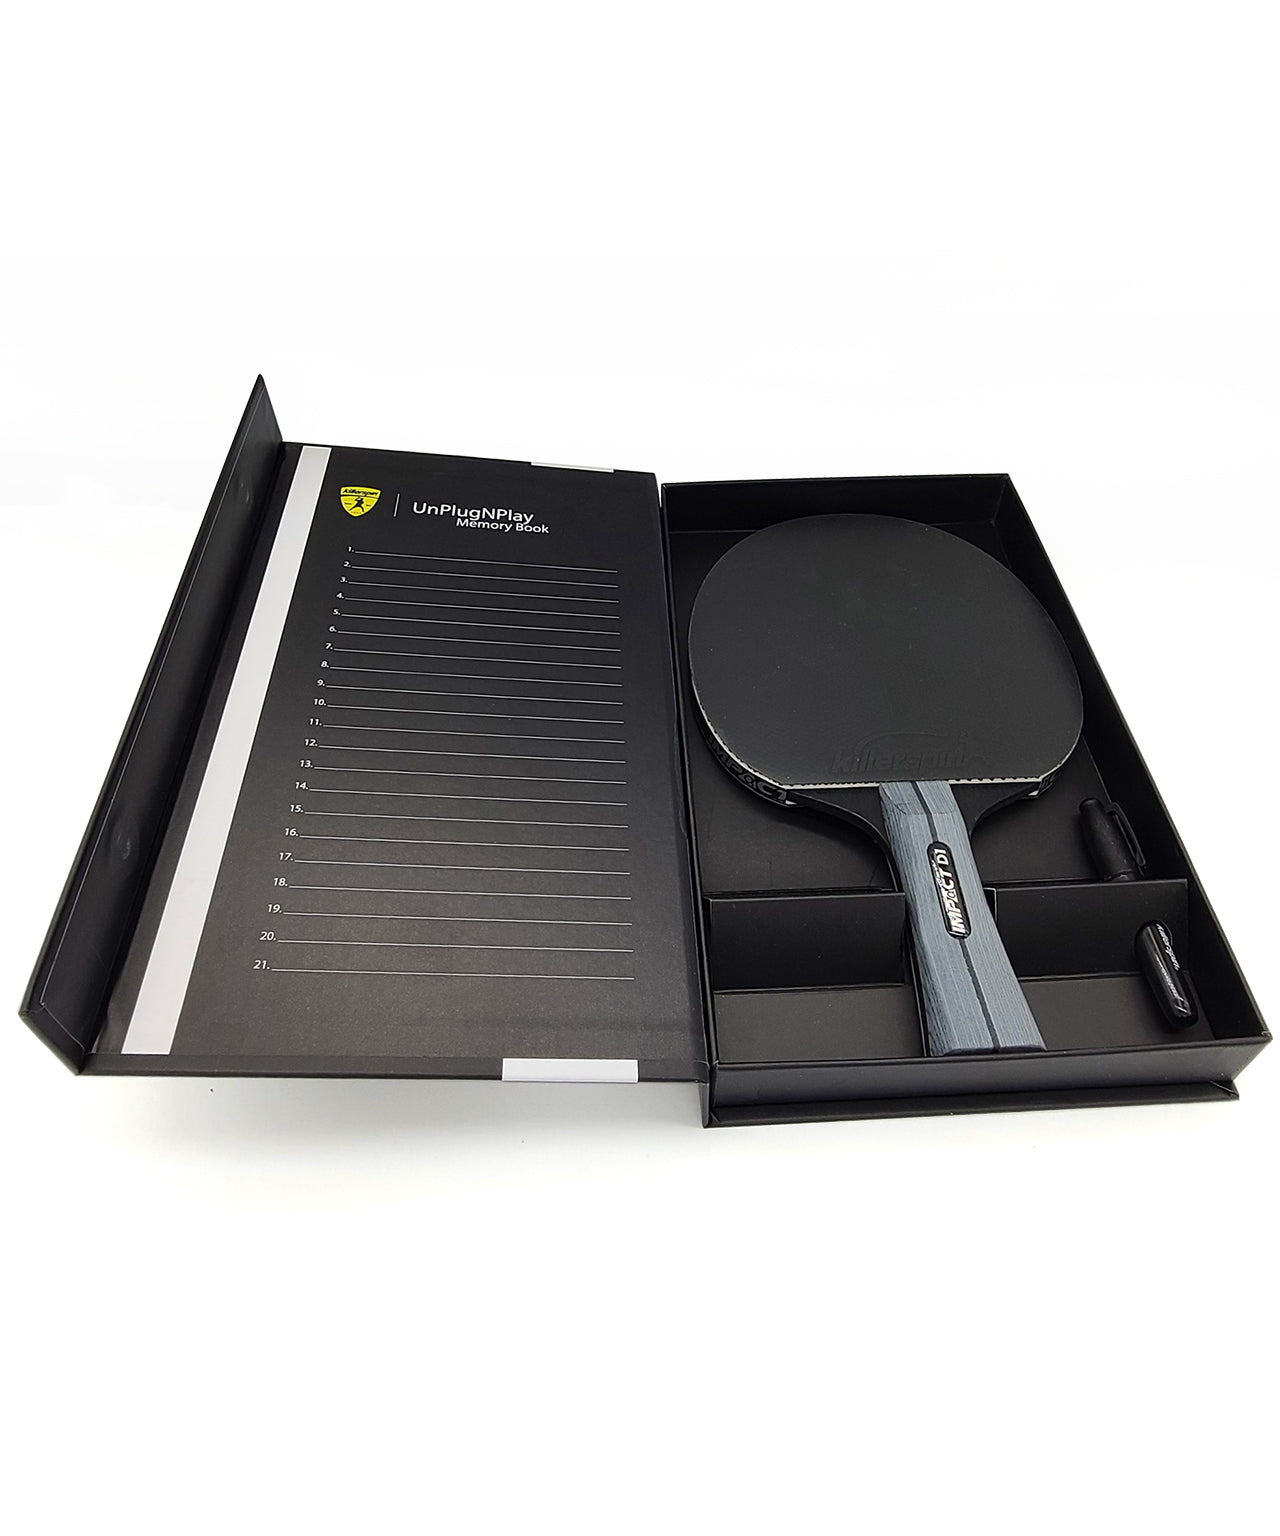 killerspin-paddle-impackt-D1-table-tennis-table-racket